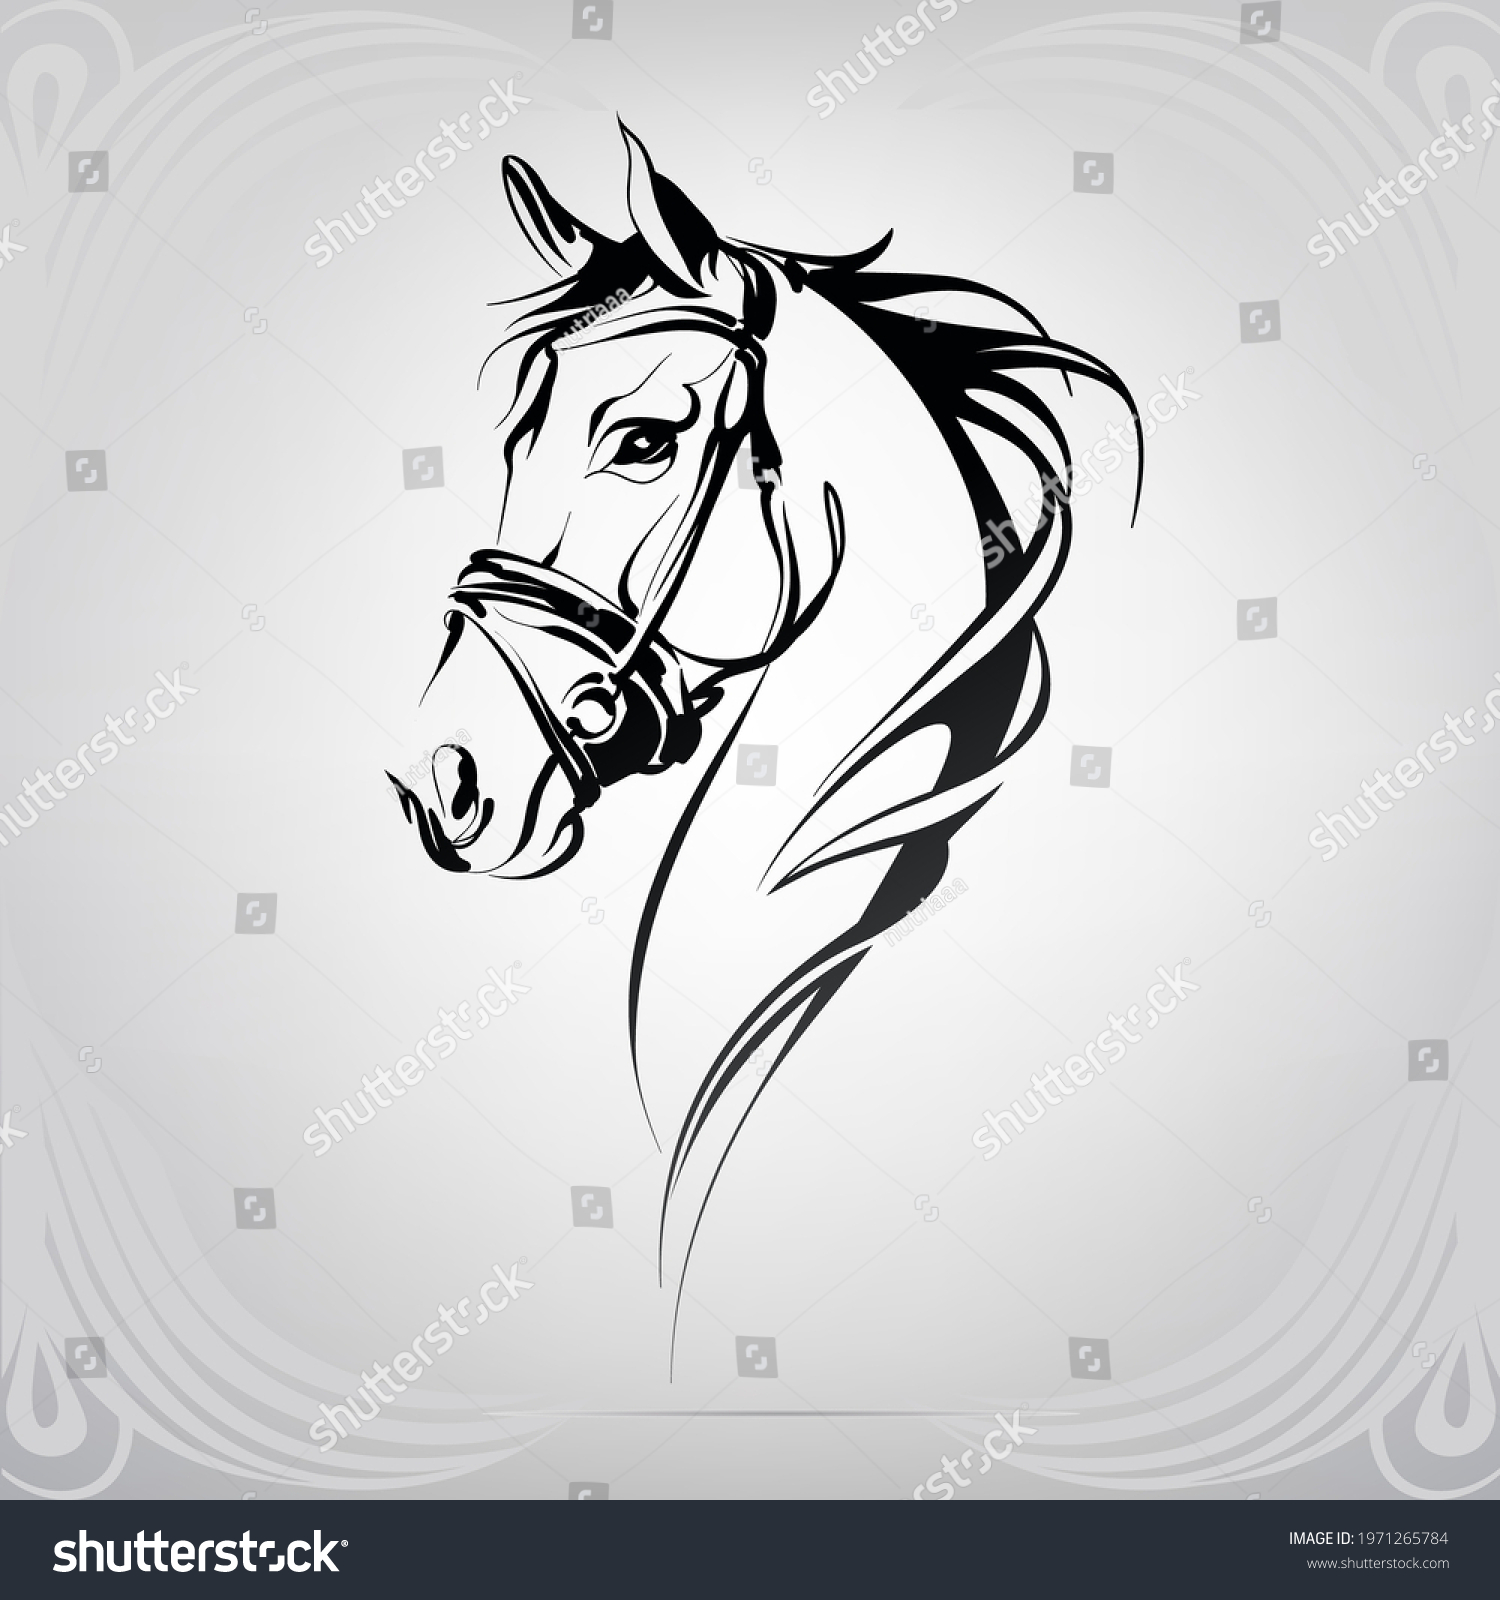 160,178 Horse Drawing Images, Stock Photos & Vectors | Shutterstock